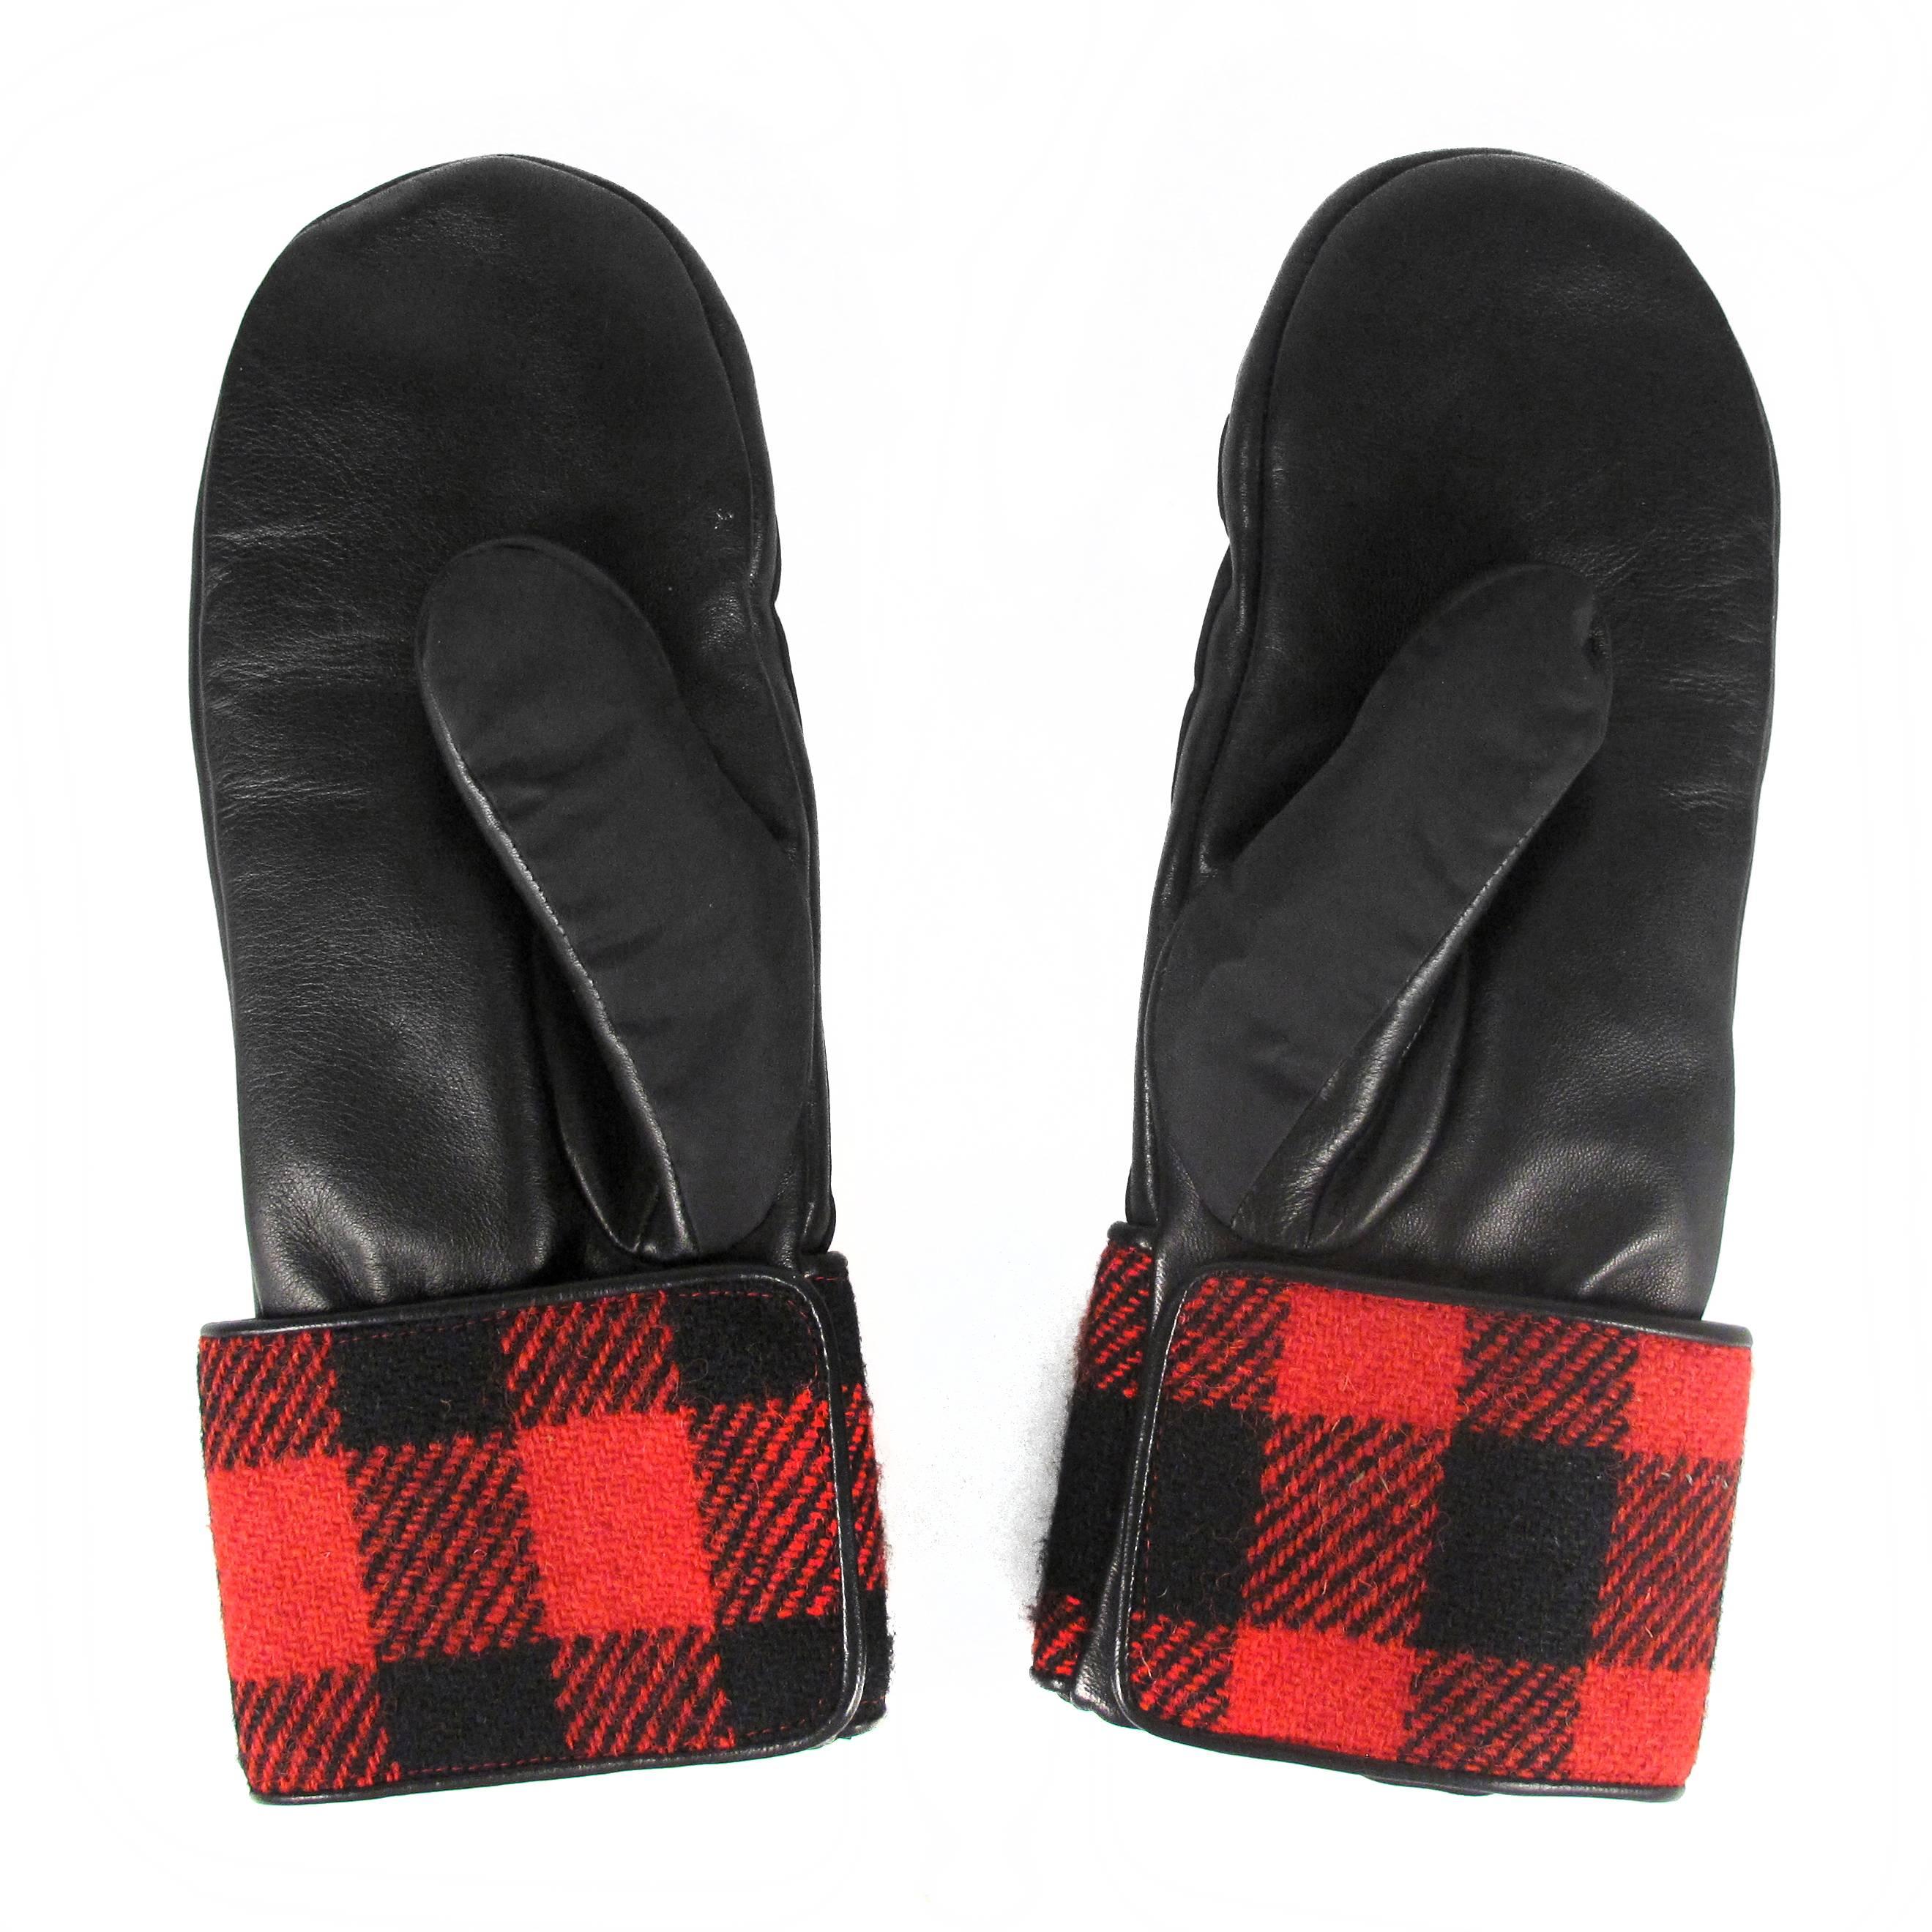 Chanel - CC Logo Mittens

Color: Black / Red 

Material: Leather, Nylon, & Wool

------------------------------------------------------------

Details:

- black & red plaid wristlets

- CC logo at wrist

- adjustable velcro closure at